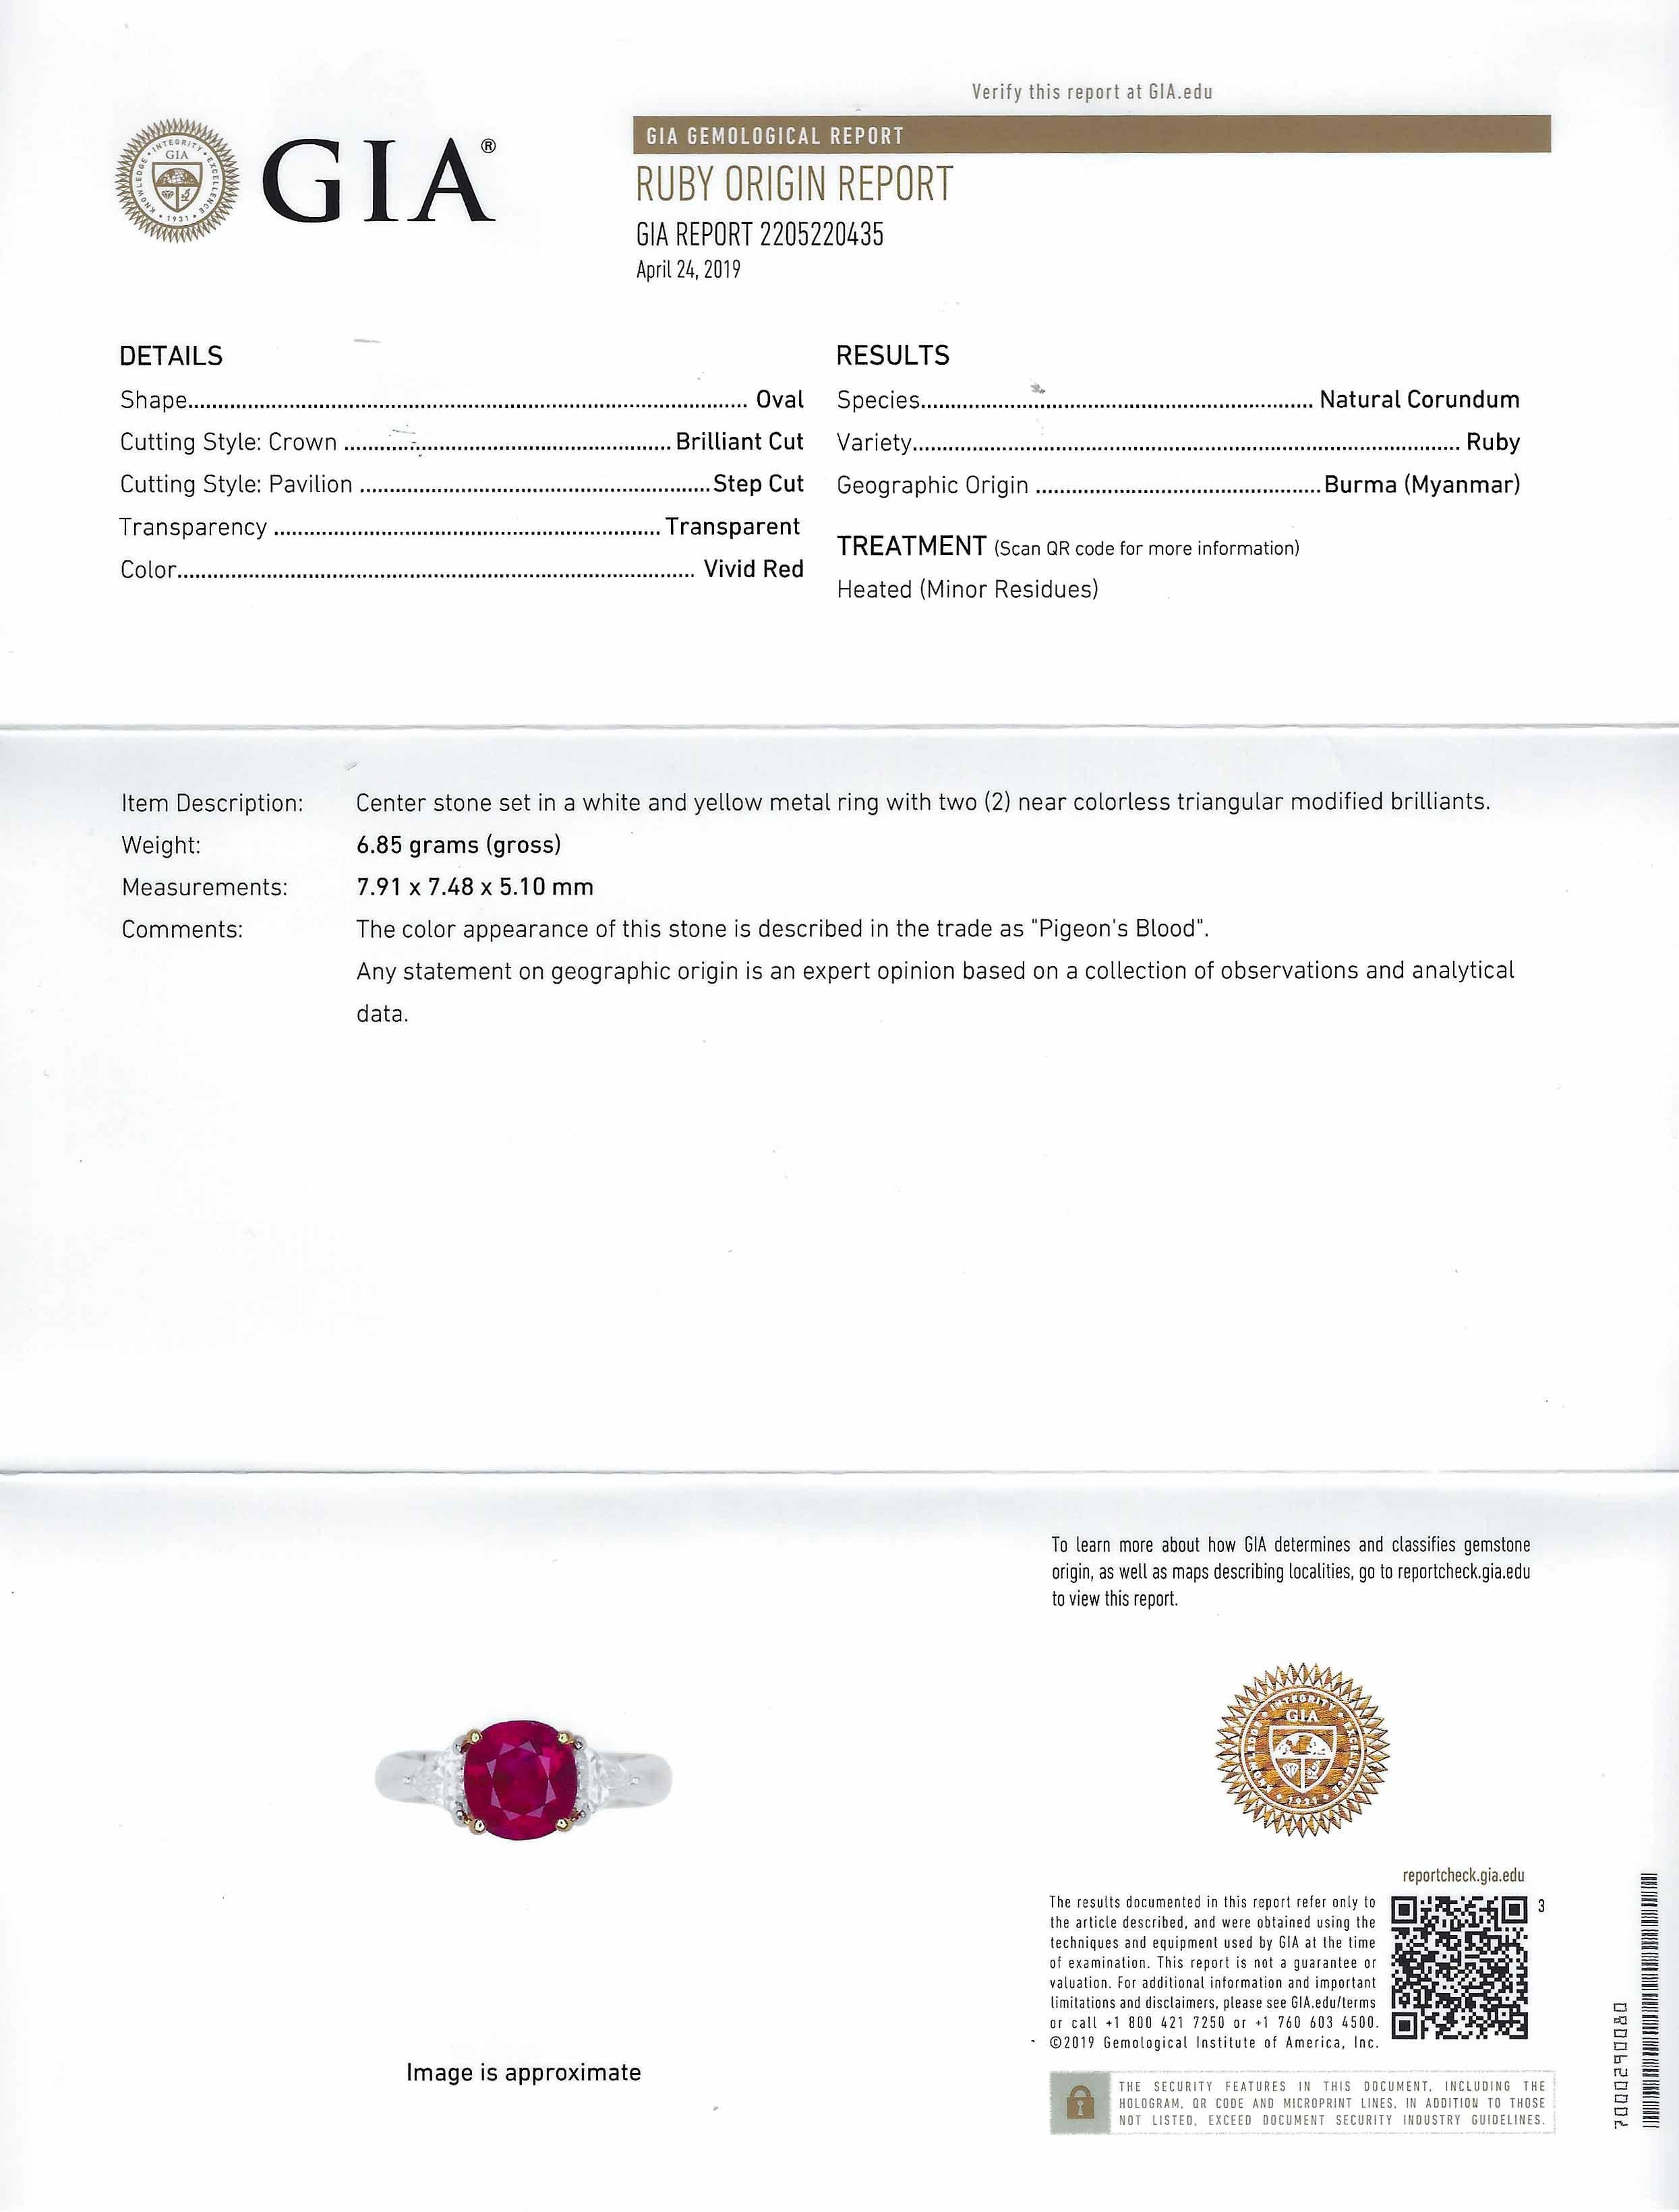 Oval Cut GIA Certified 3 Carat Pigeon Blood Burma Ruby Engagement Ring